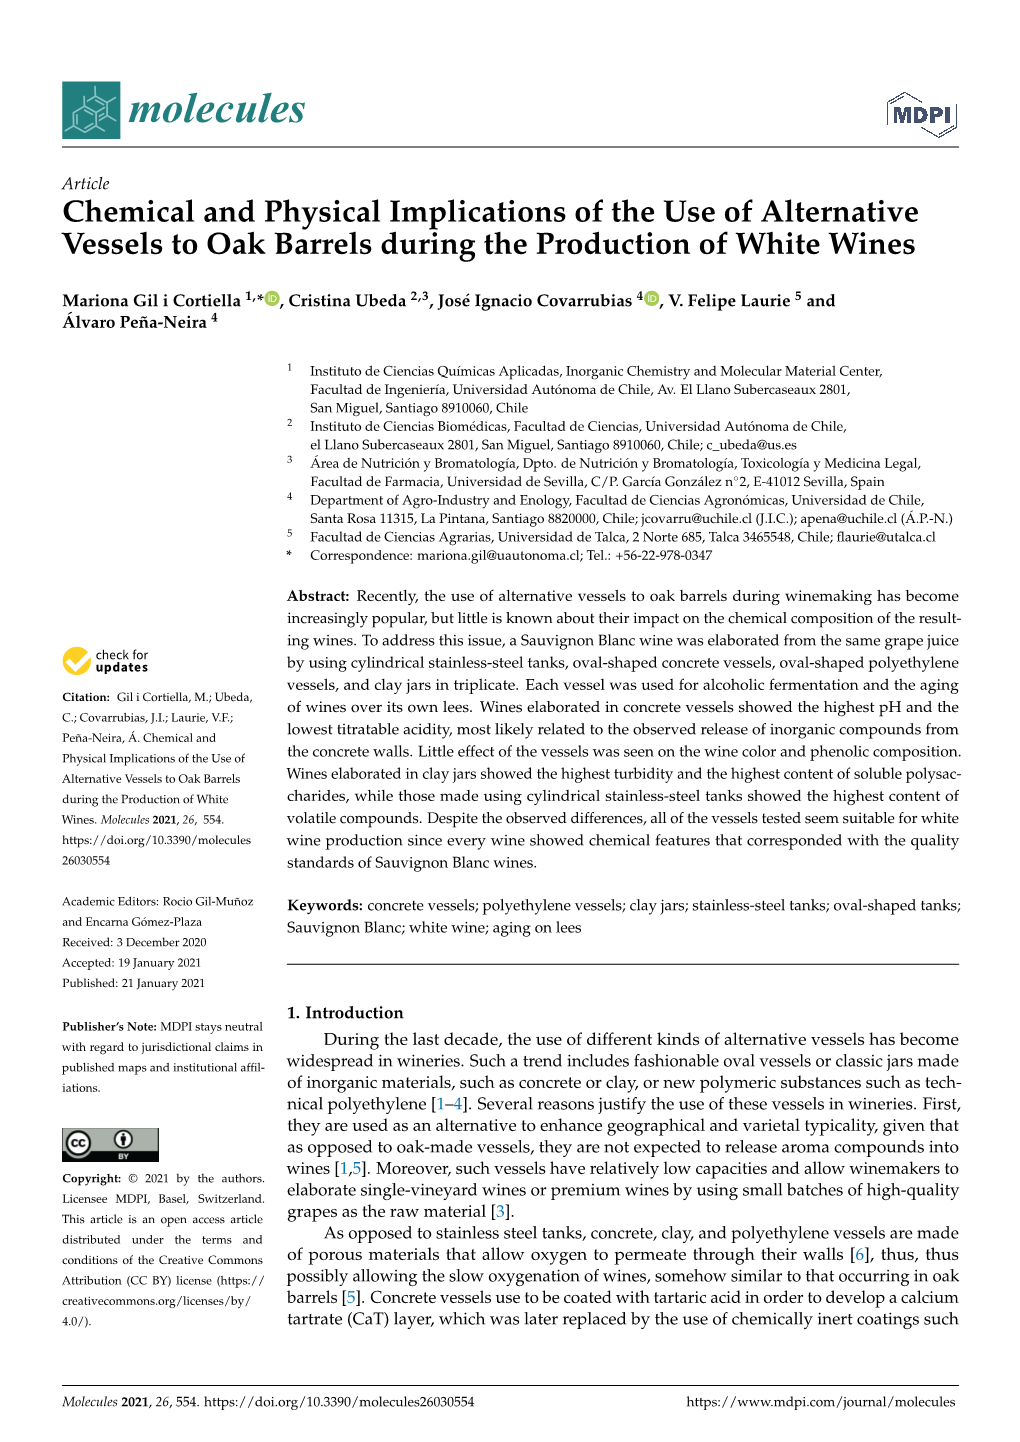 Chemical and Physical Implications of the Use of Alternative Vessels to Oak Barrels During the Production of White Wines